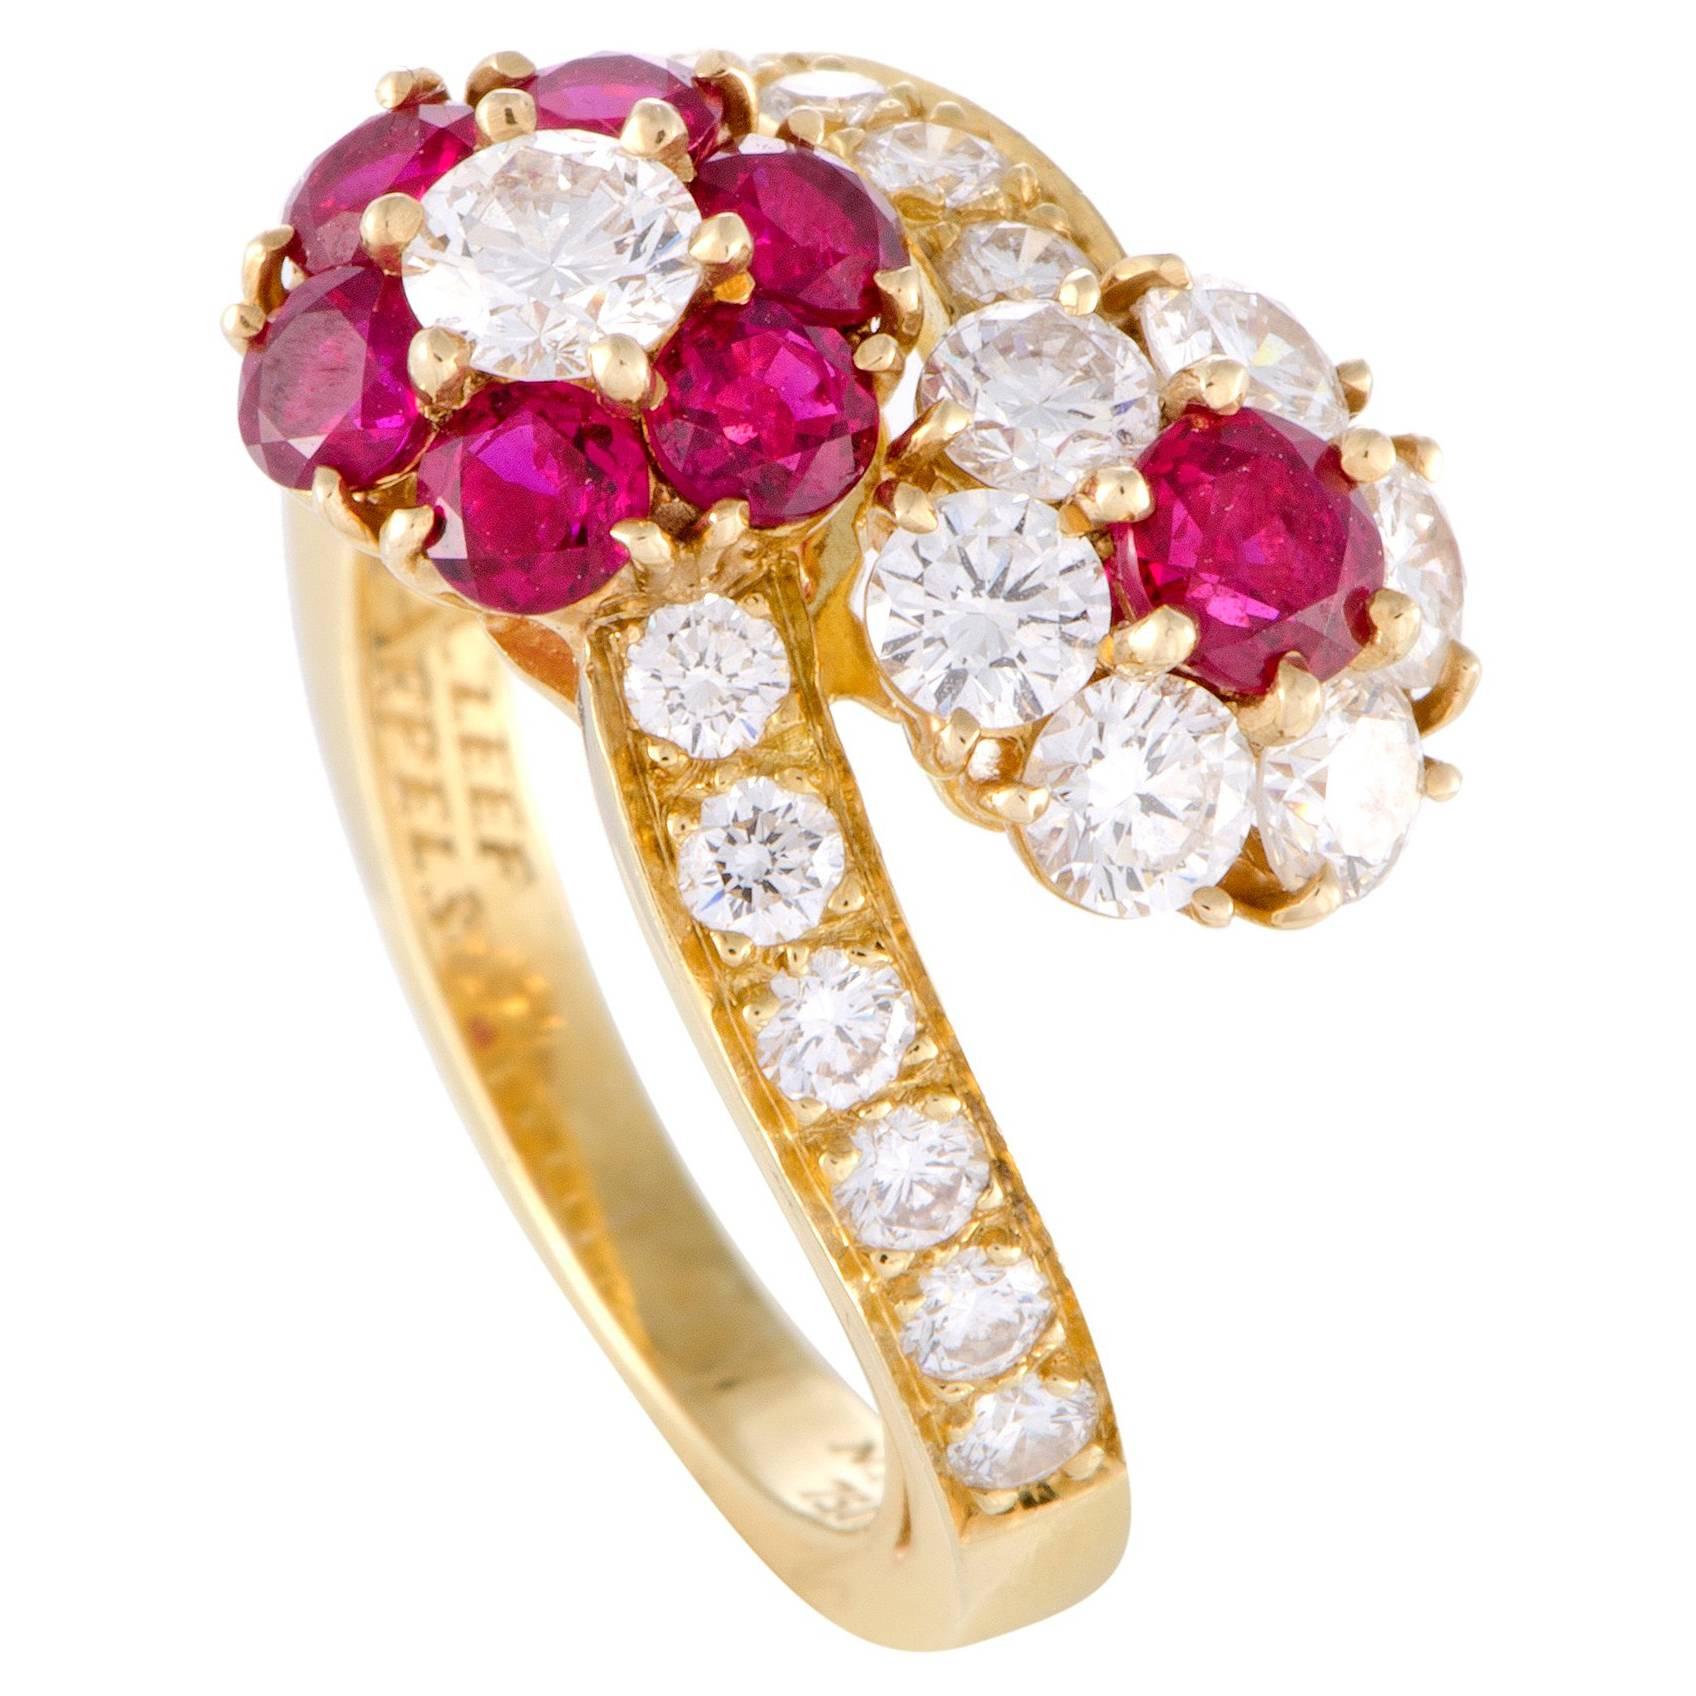 Van Cleef & Arpels Diamond and Ruby Flowers Yellow Gold Ring